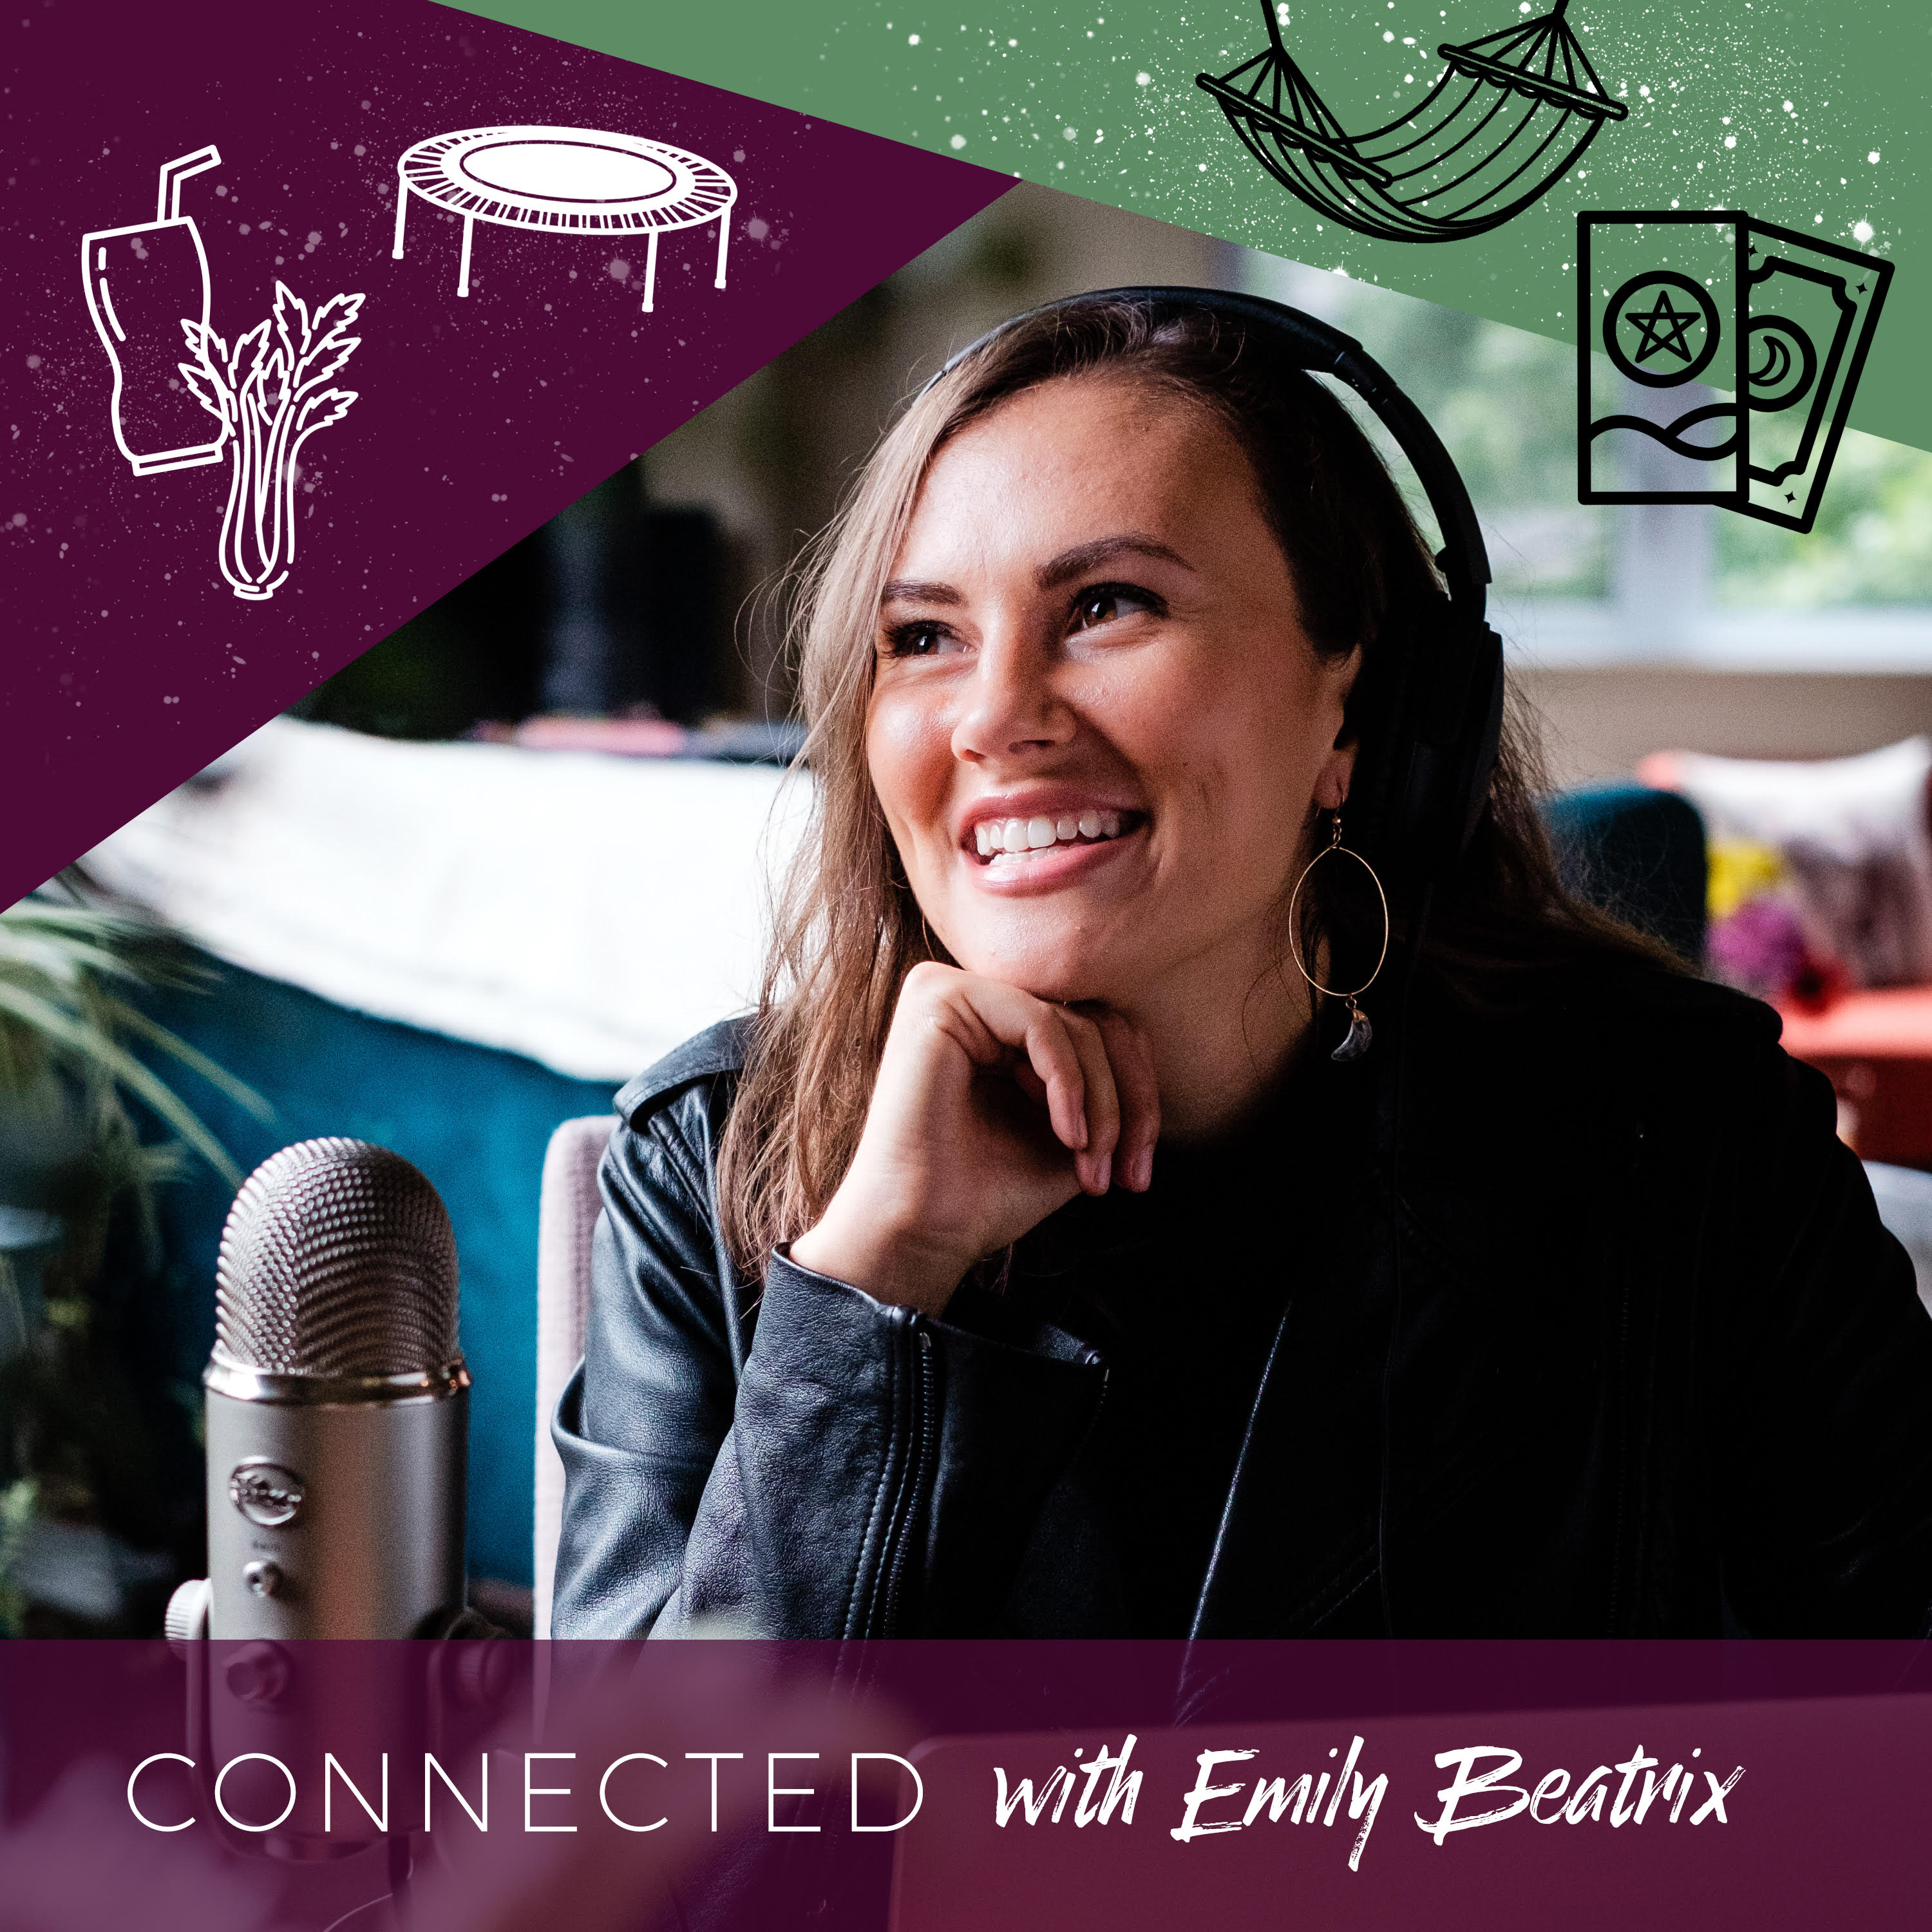 Connected with Emily Beatrix